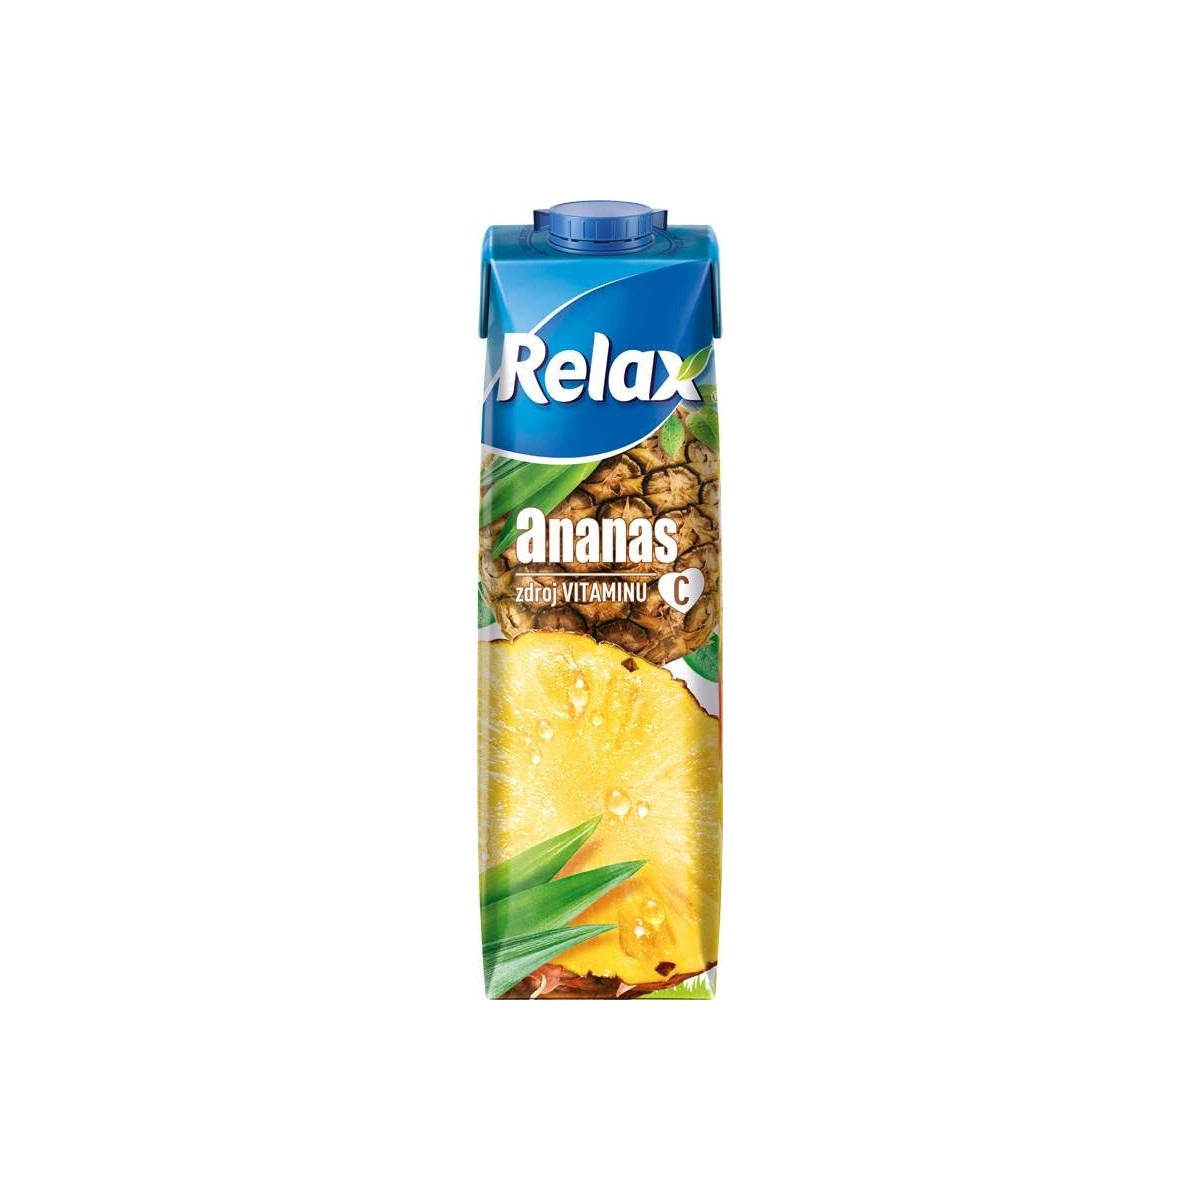 Relax ananas 1l